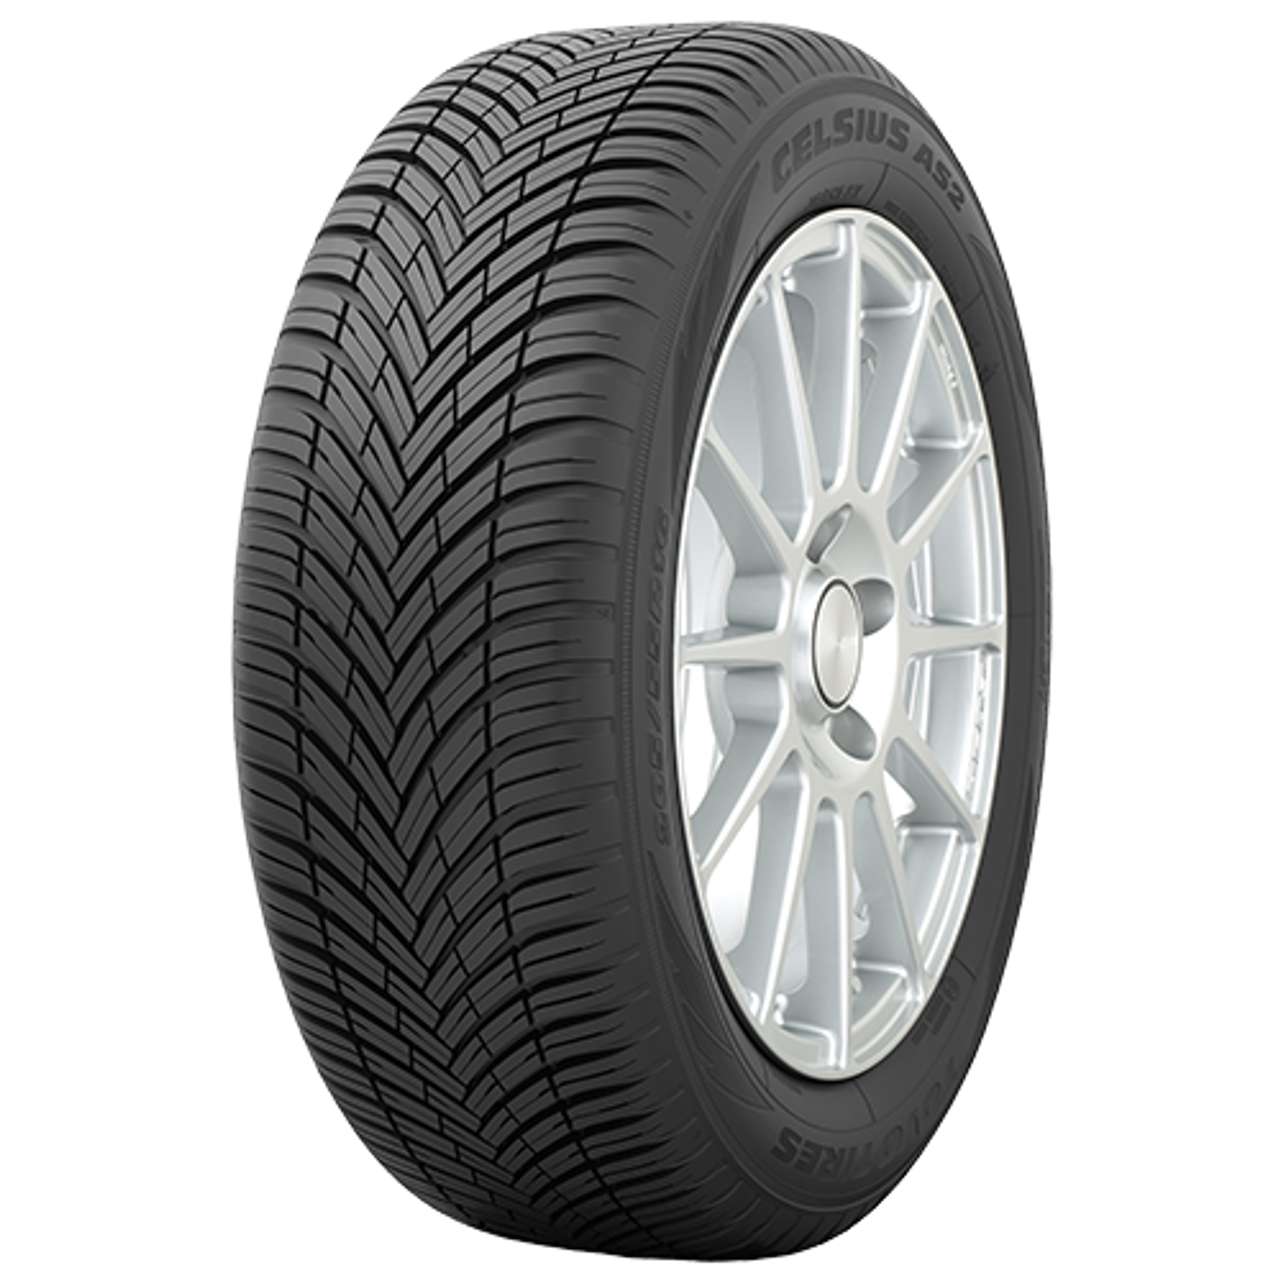 TOYO CELSIUS AS2 225/60R17 103V BSW